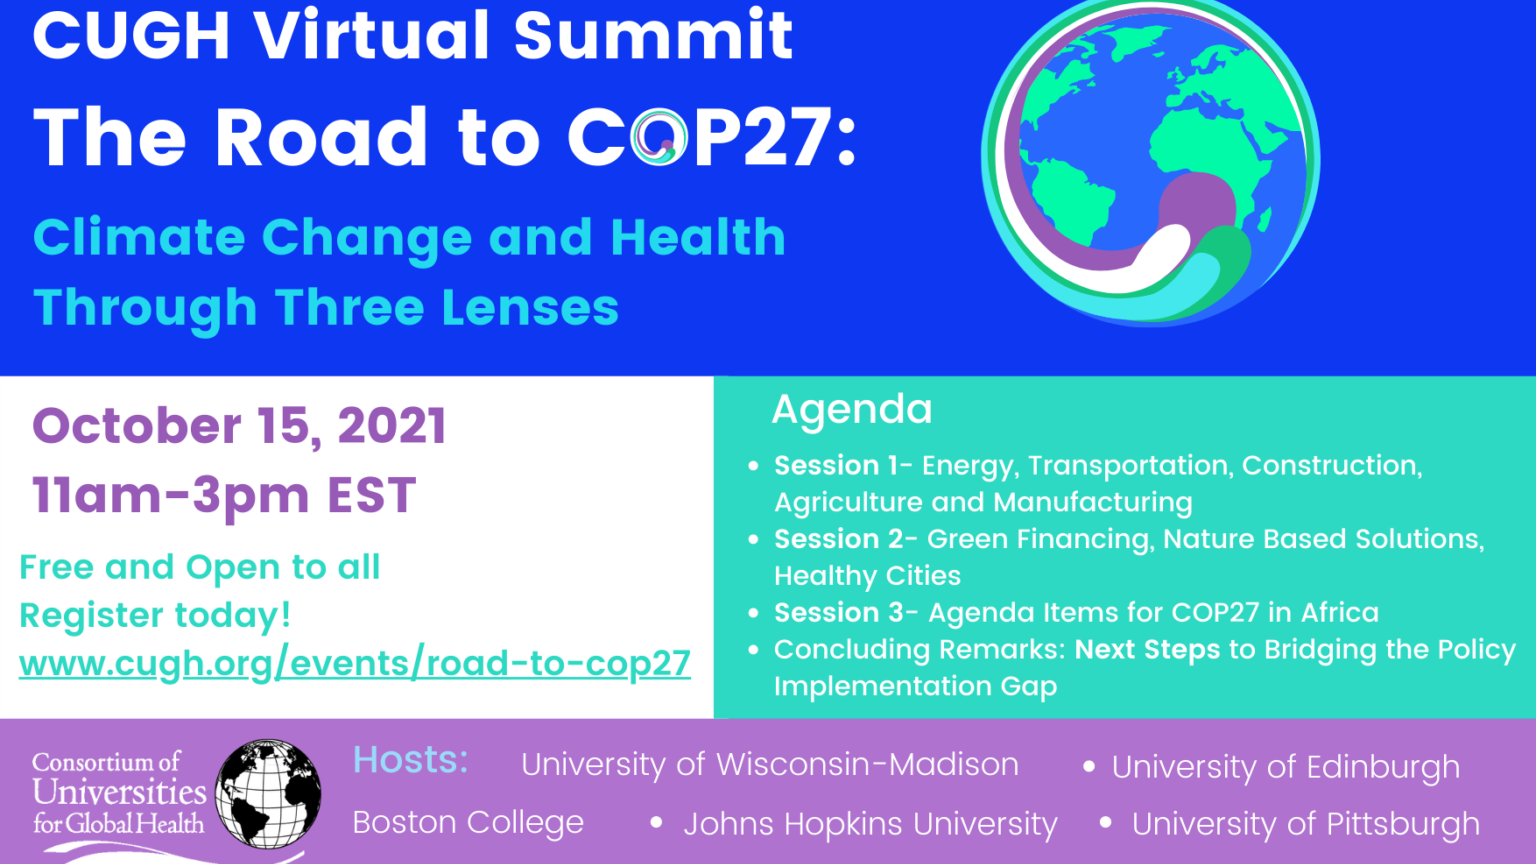 The Road to COP27: Climate and Health Through Three Lenses